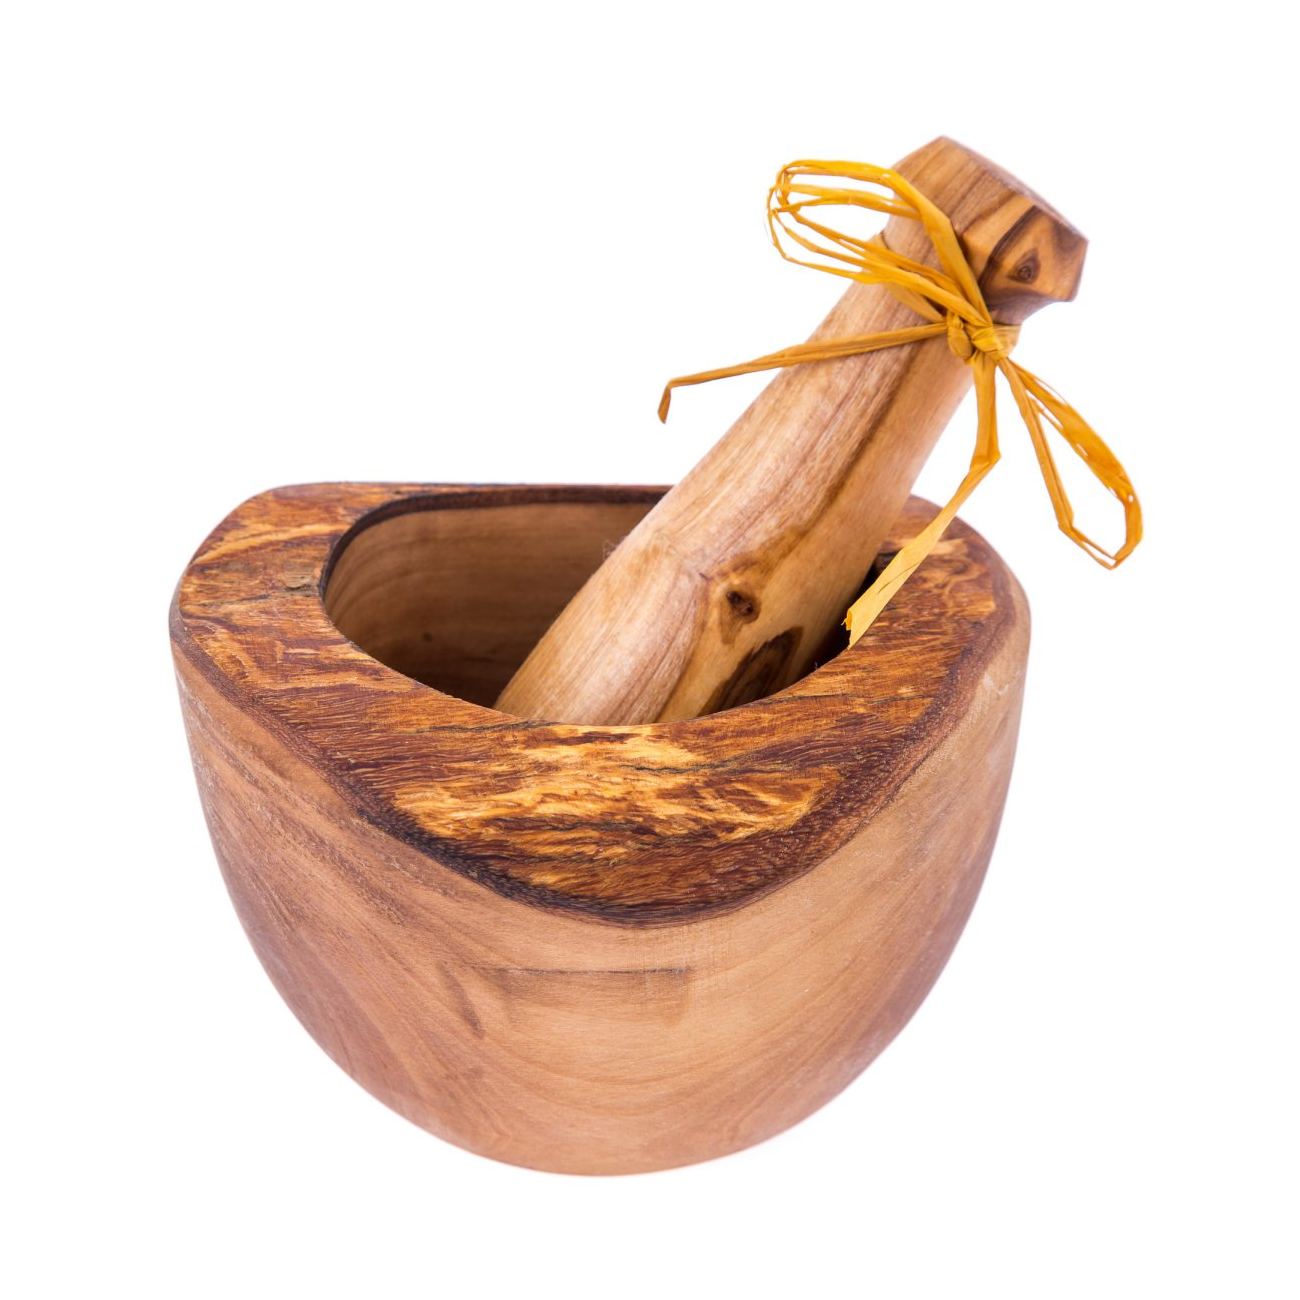 BeldiNest Handcrafted Olive Wood 5 Rustic Edge Mortar and Pestle Handmade Crush Spices Garlic Smasher Large Molcajete BN-RMP10-167-1